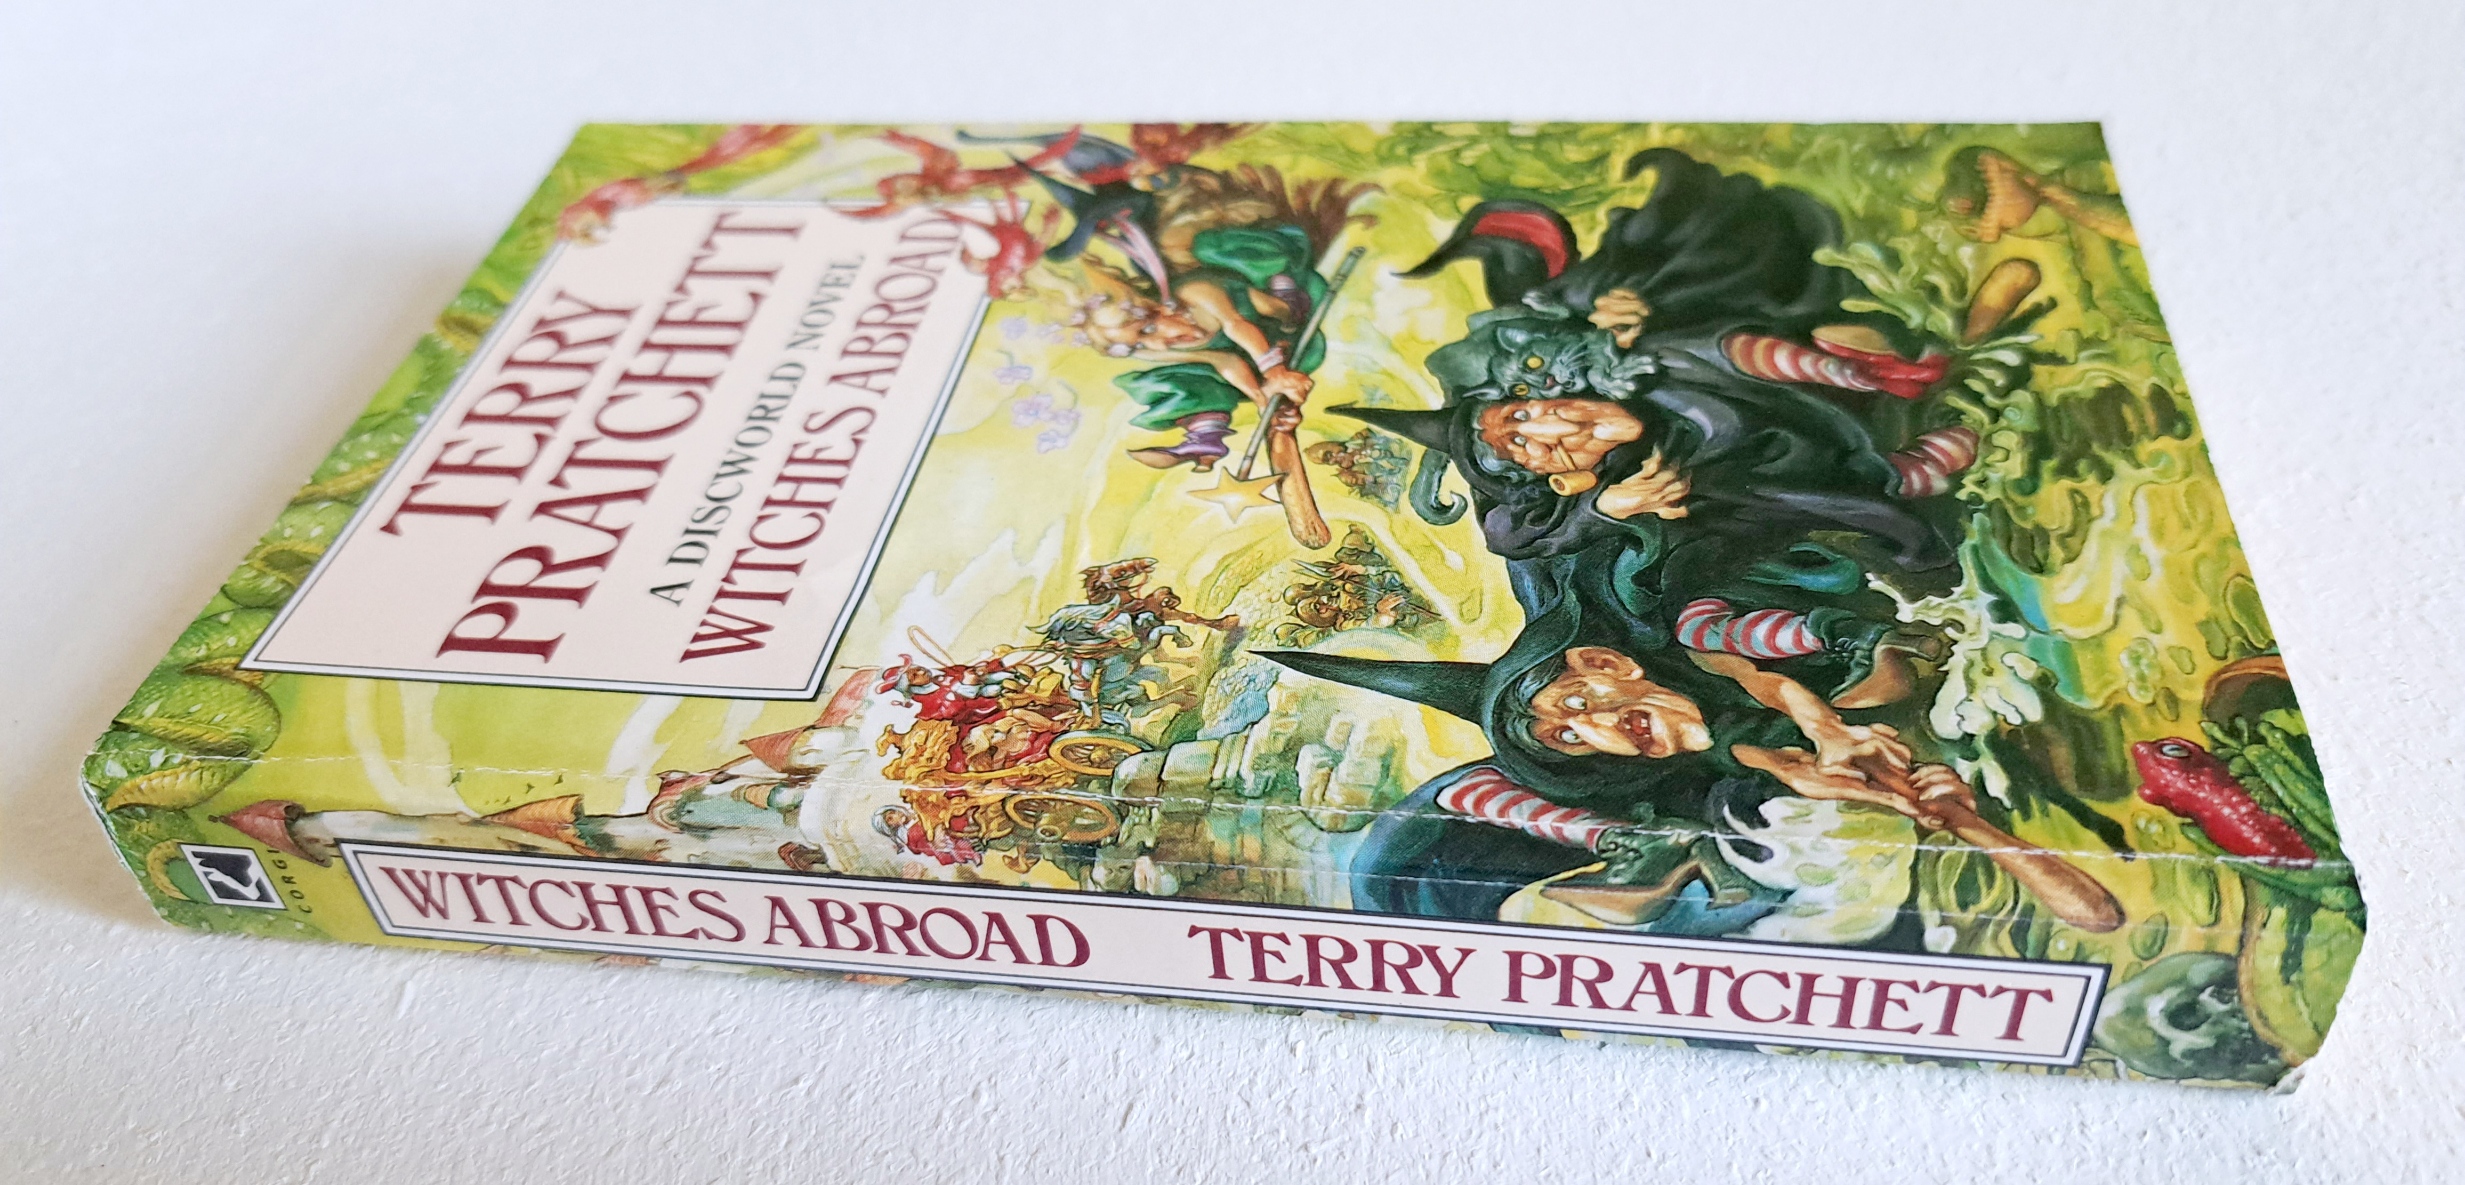 Terry Prachett's Witches abroad, an example of a mass market paperback.